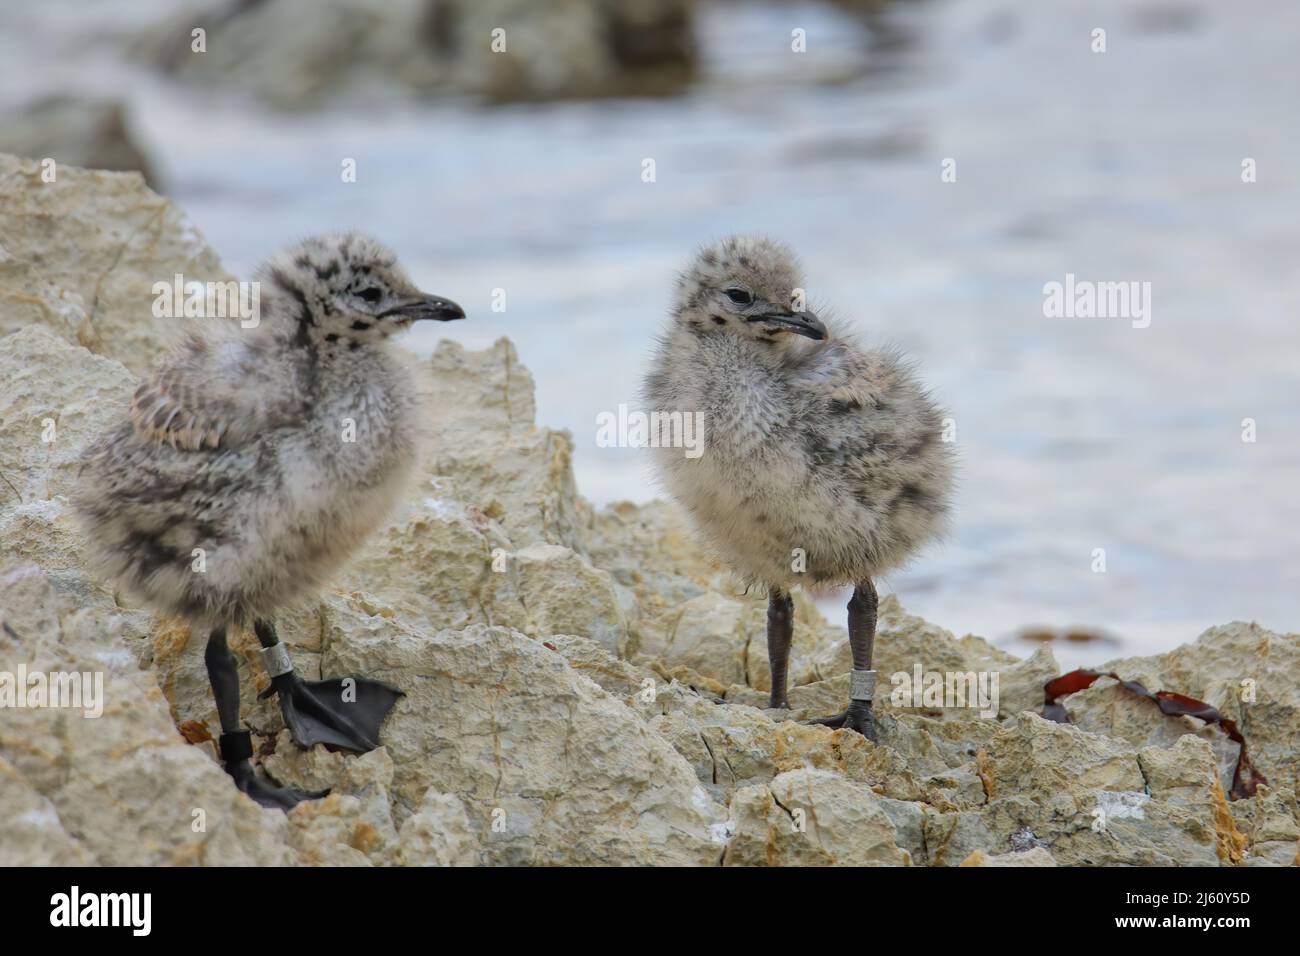 Chicks of Red-billed gull standing on rocks, Kaikoura peninsula, South Island, New Zealand. This bird is native to New Zealand. Stock Photo